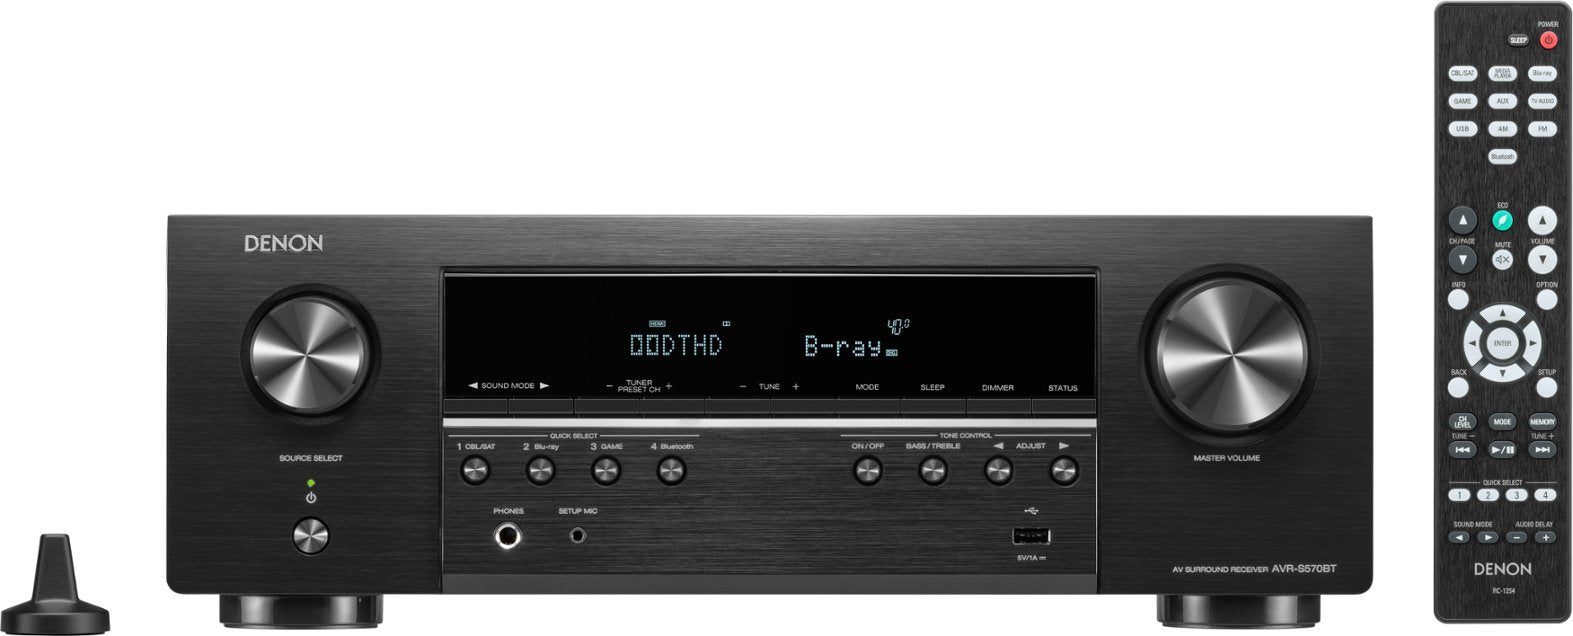 Denon AVR-S570BT 5.2 Channel Home Theater Receiver (Certified Refurbished)